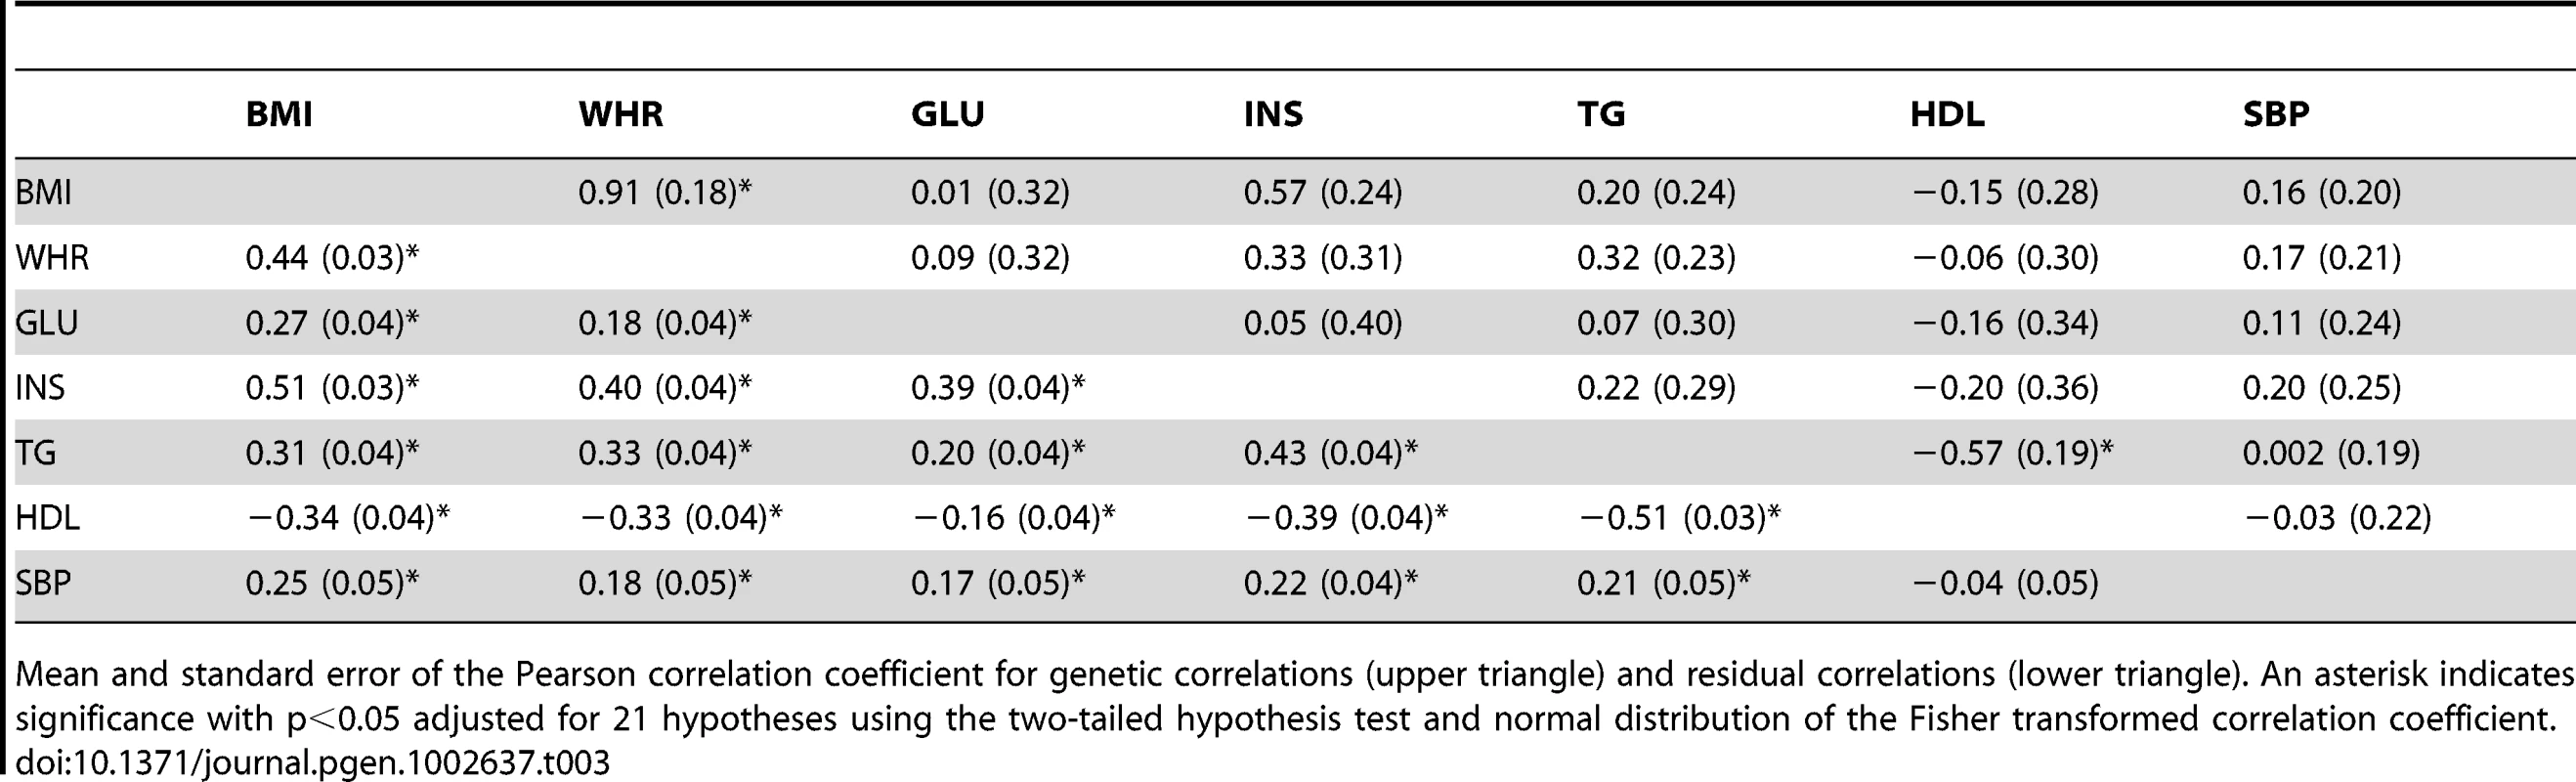 Genetic and residual correlations between MetS traits in the ARIC population among unrelated individuals from the bivariate REML model.